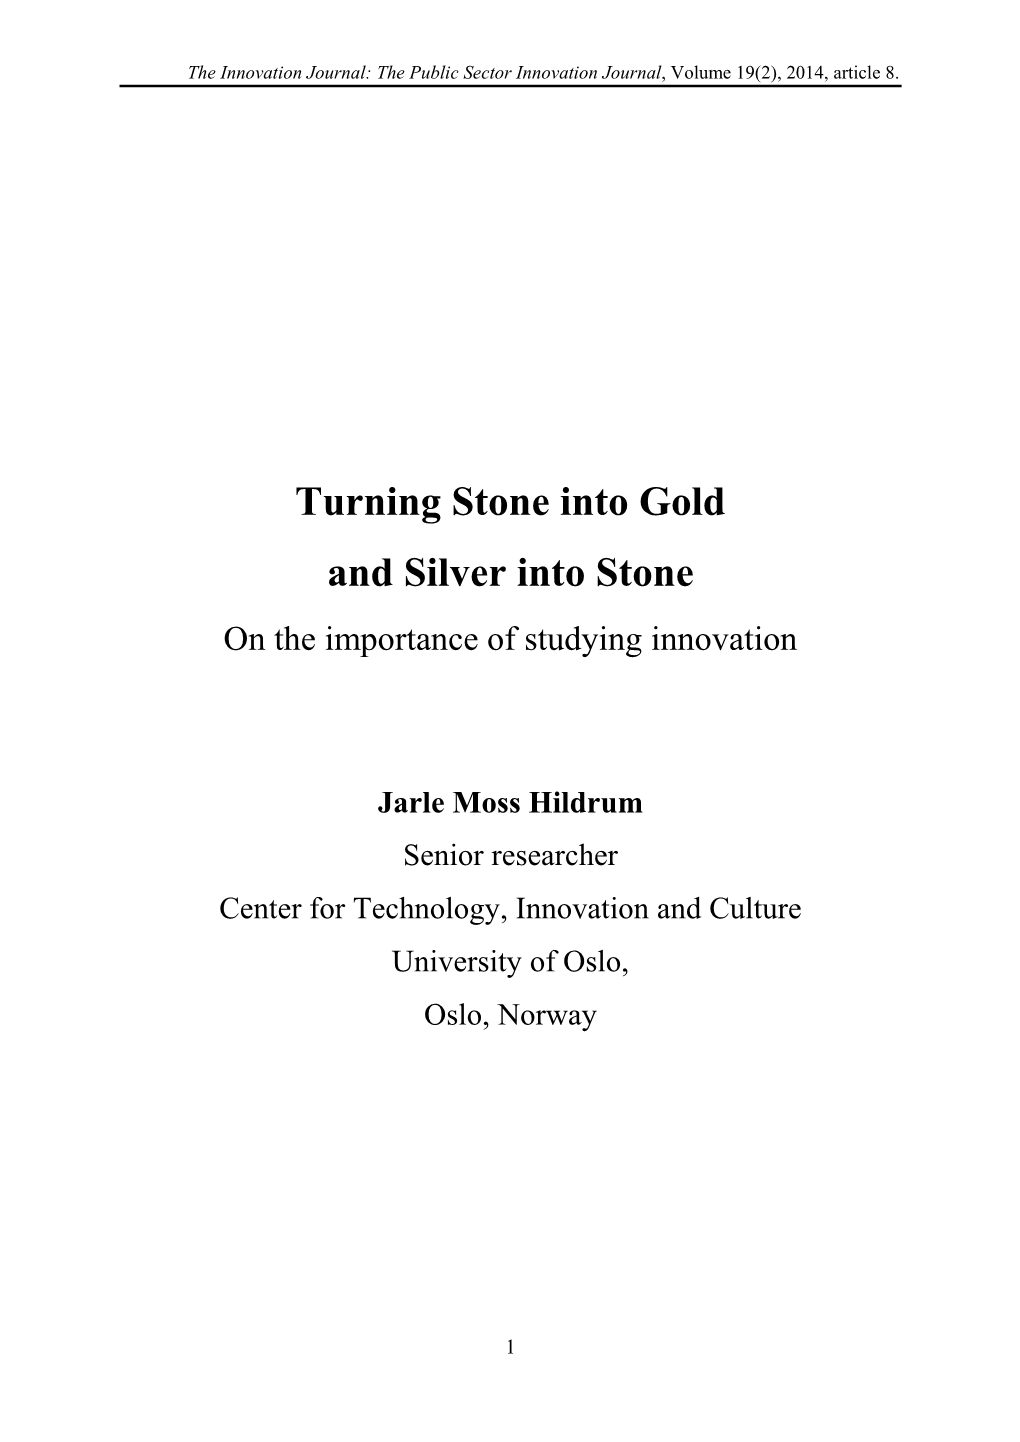 Turning Stone Into Gold and Silver Into Stone on the Importance of Studying Innovation